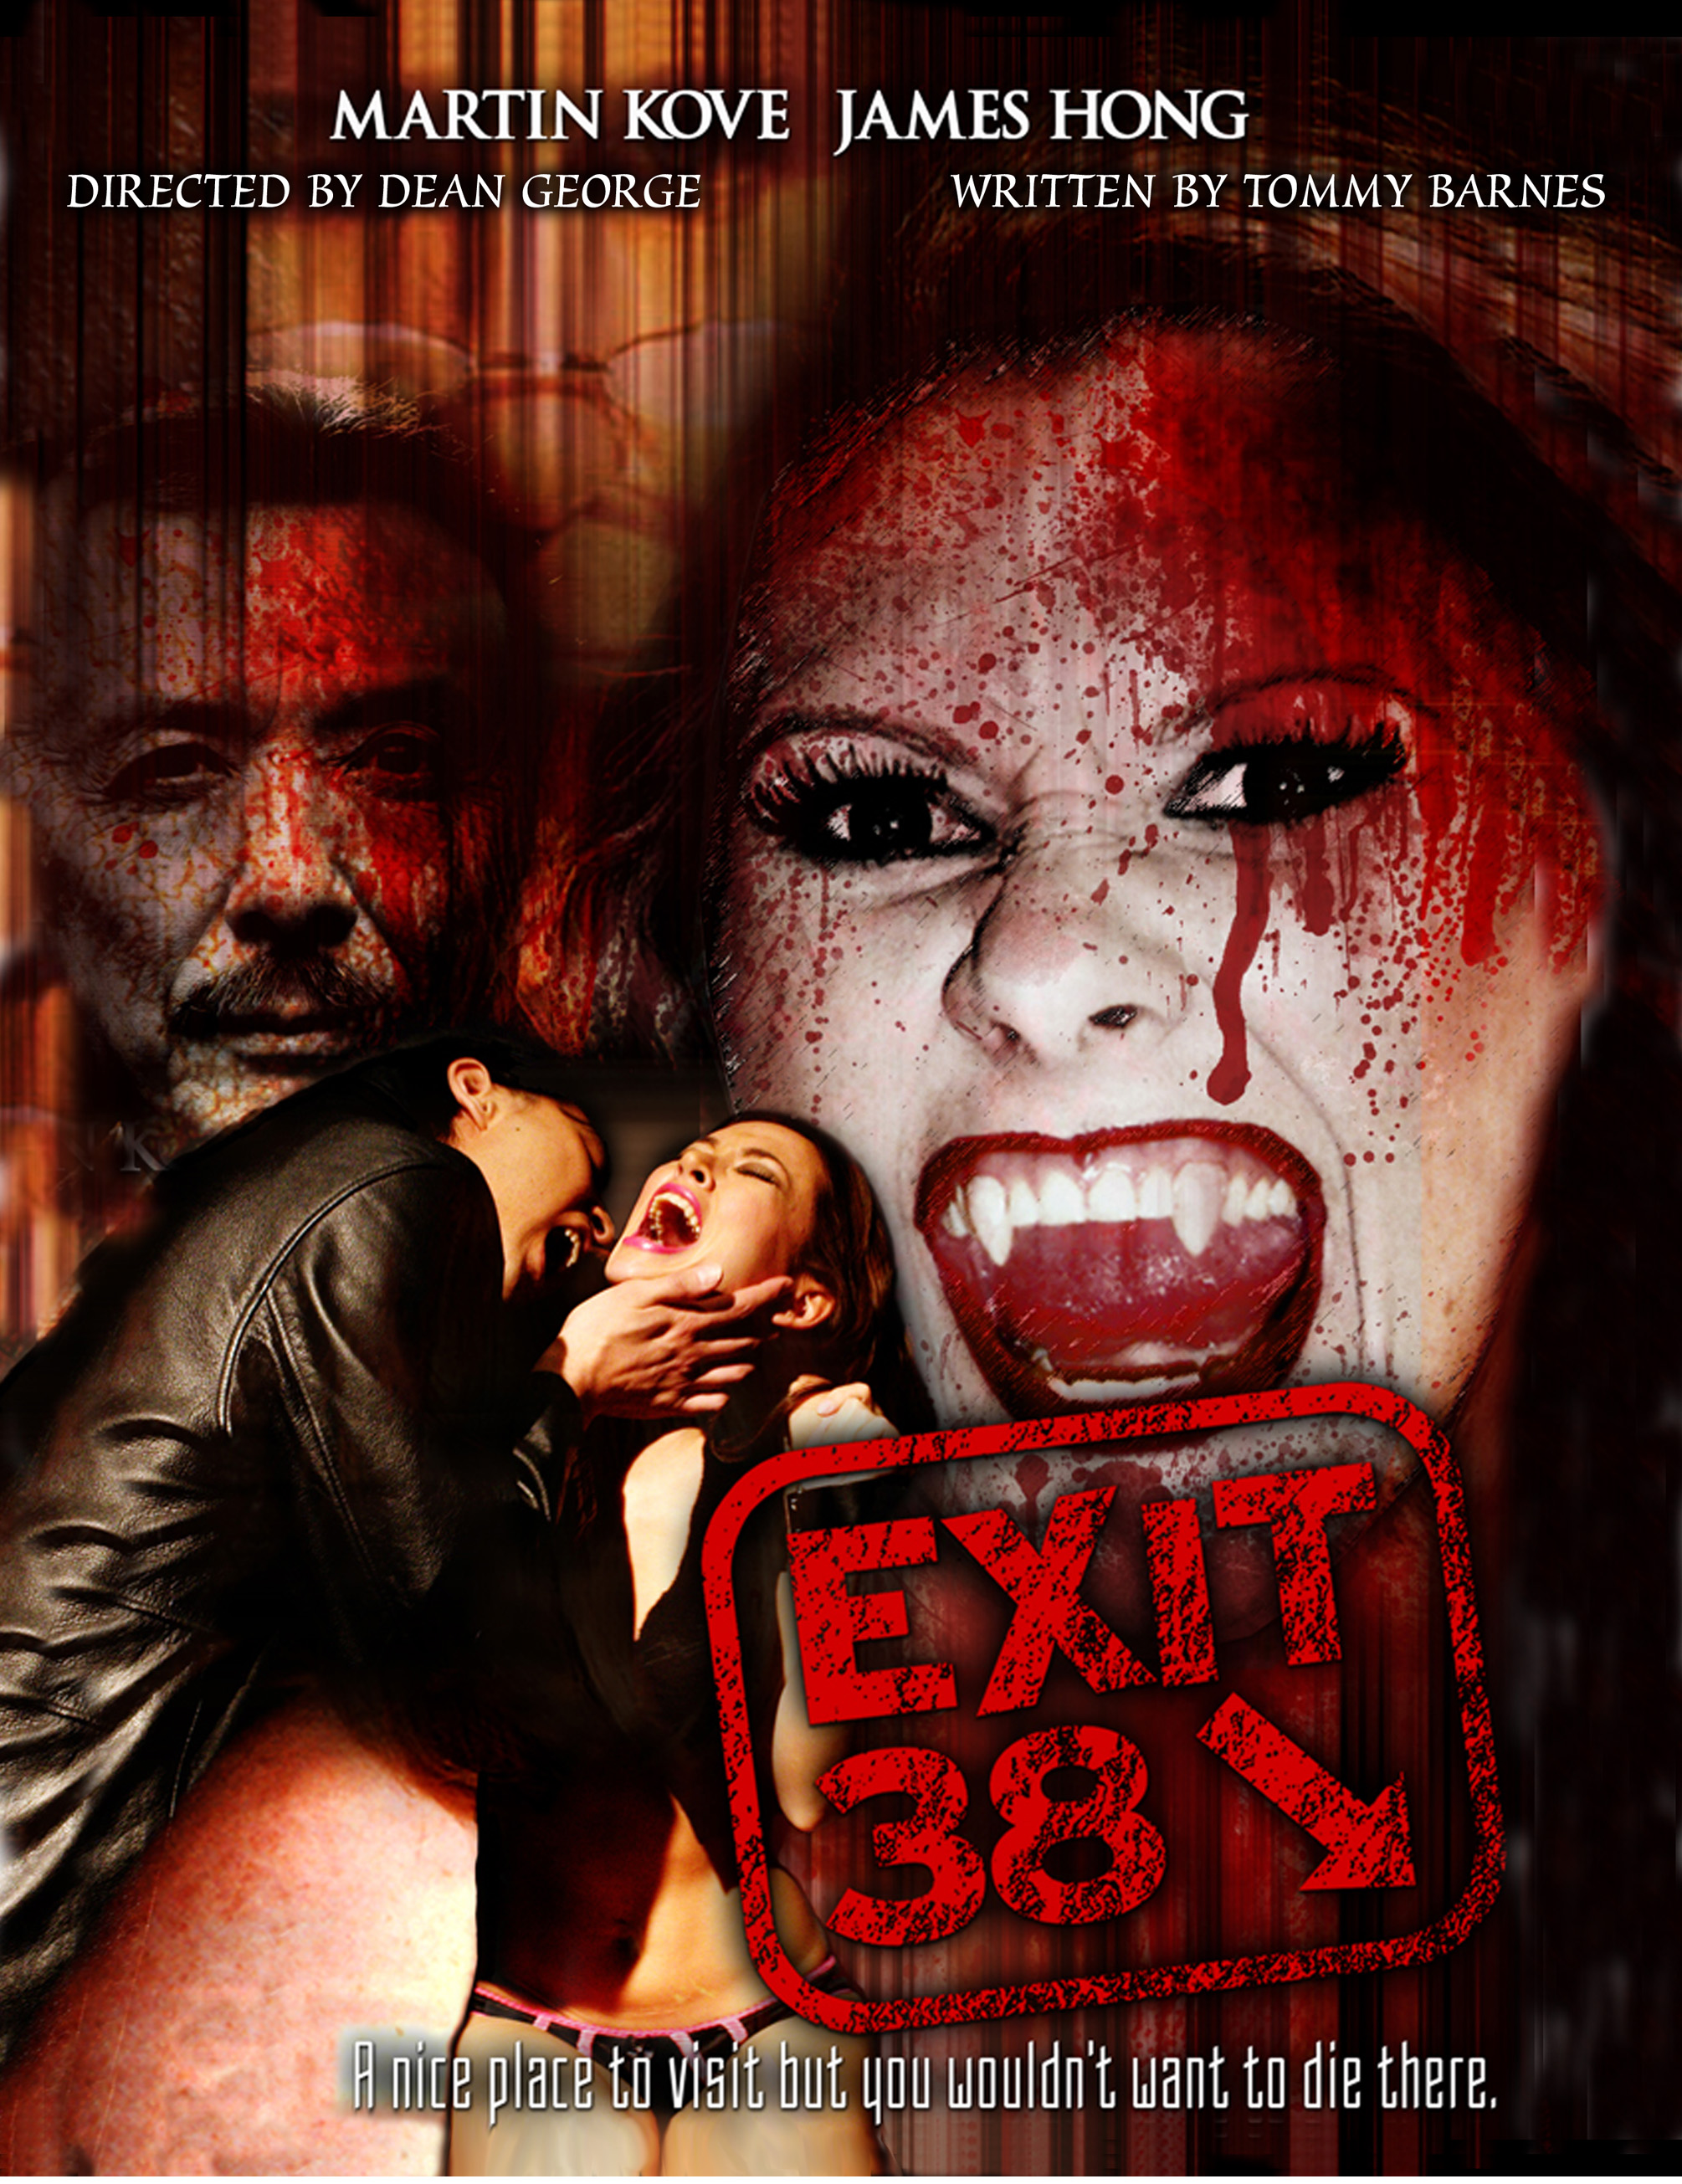 Exit 38 movie poster #2